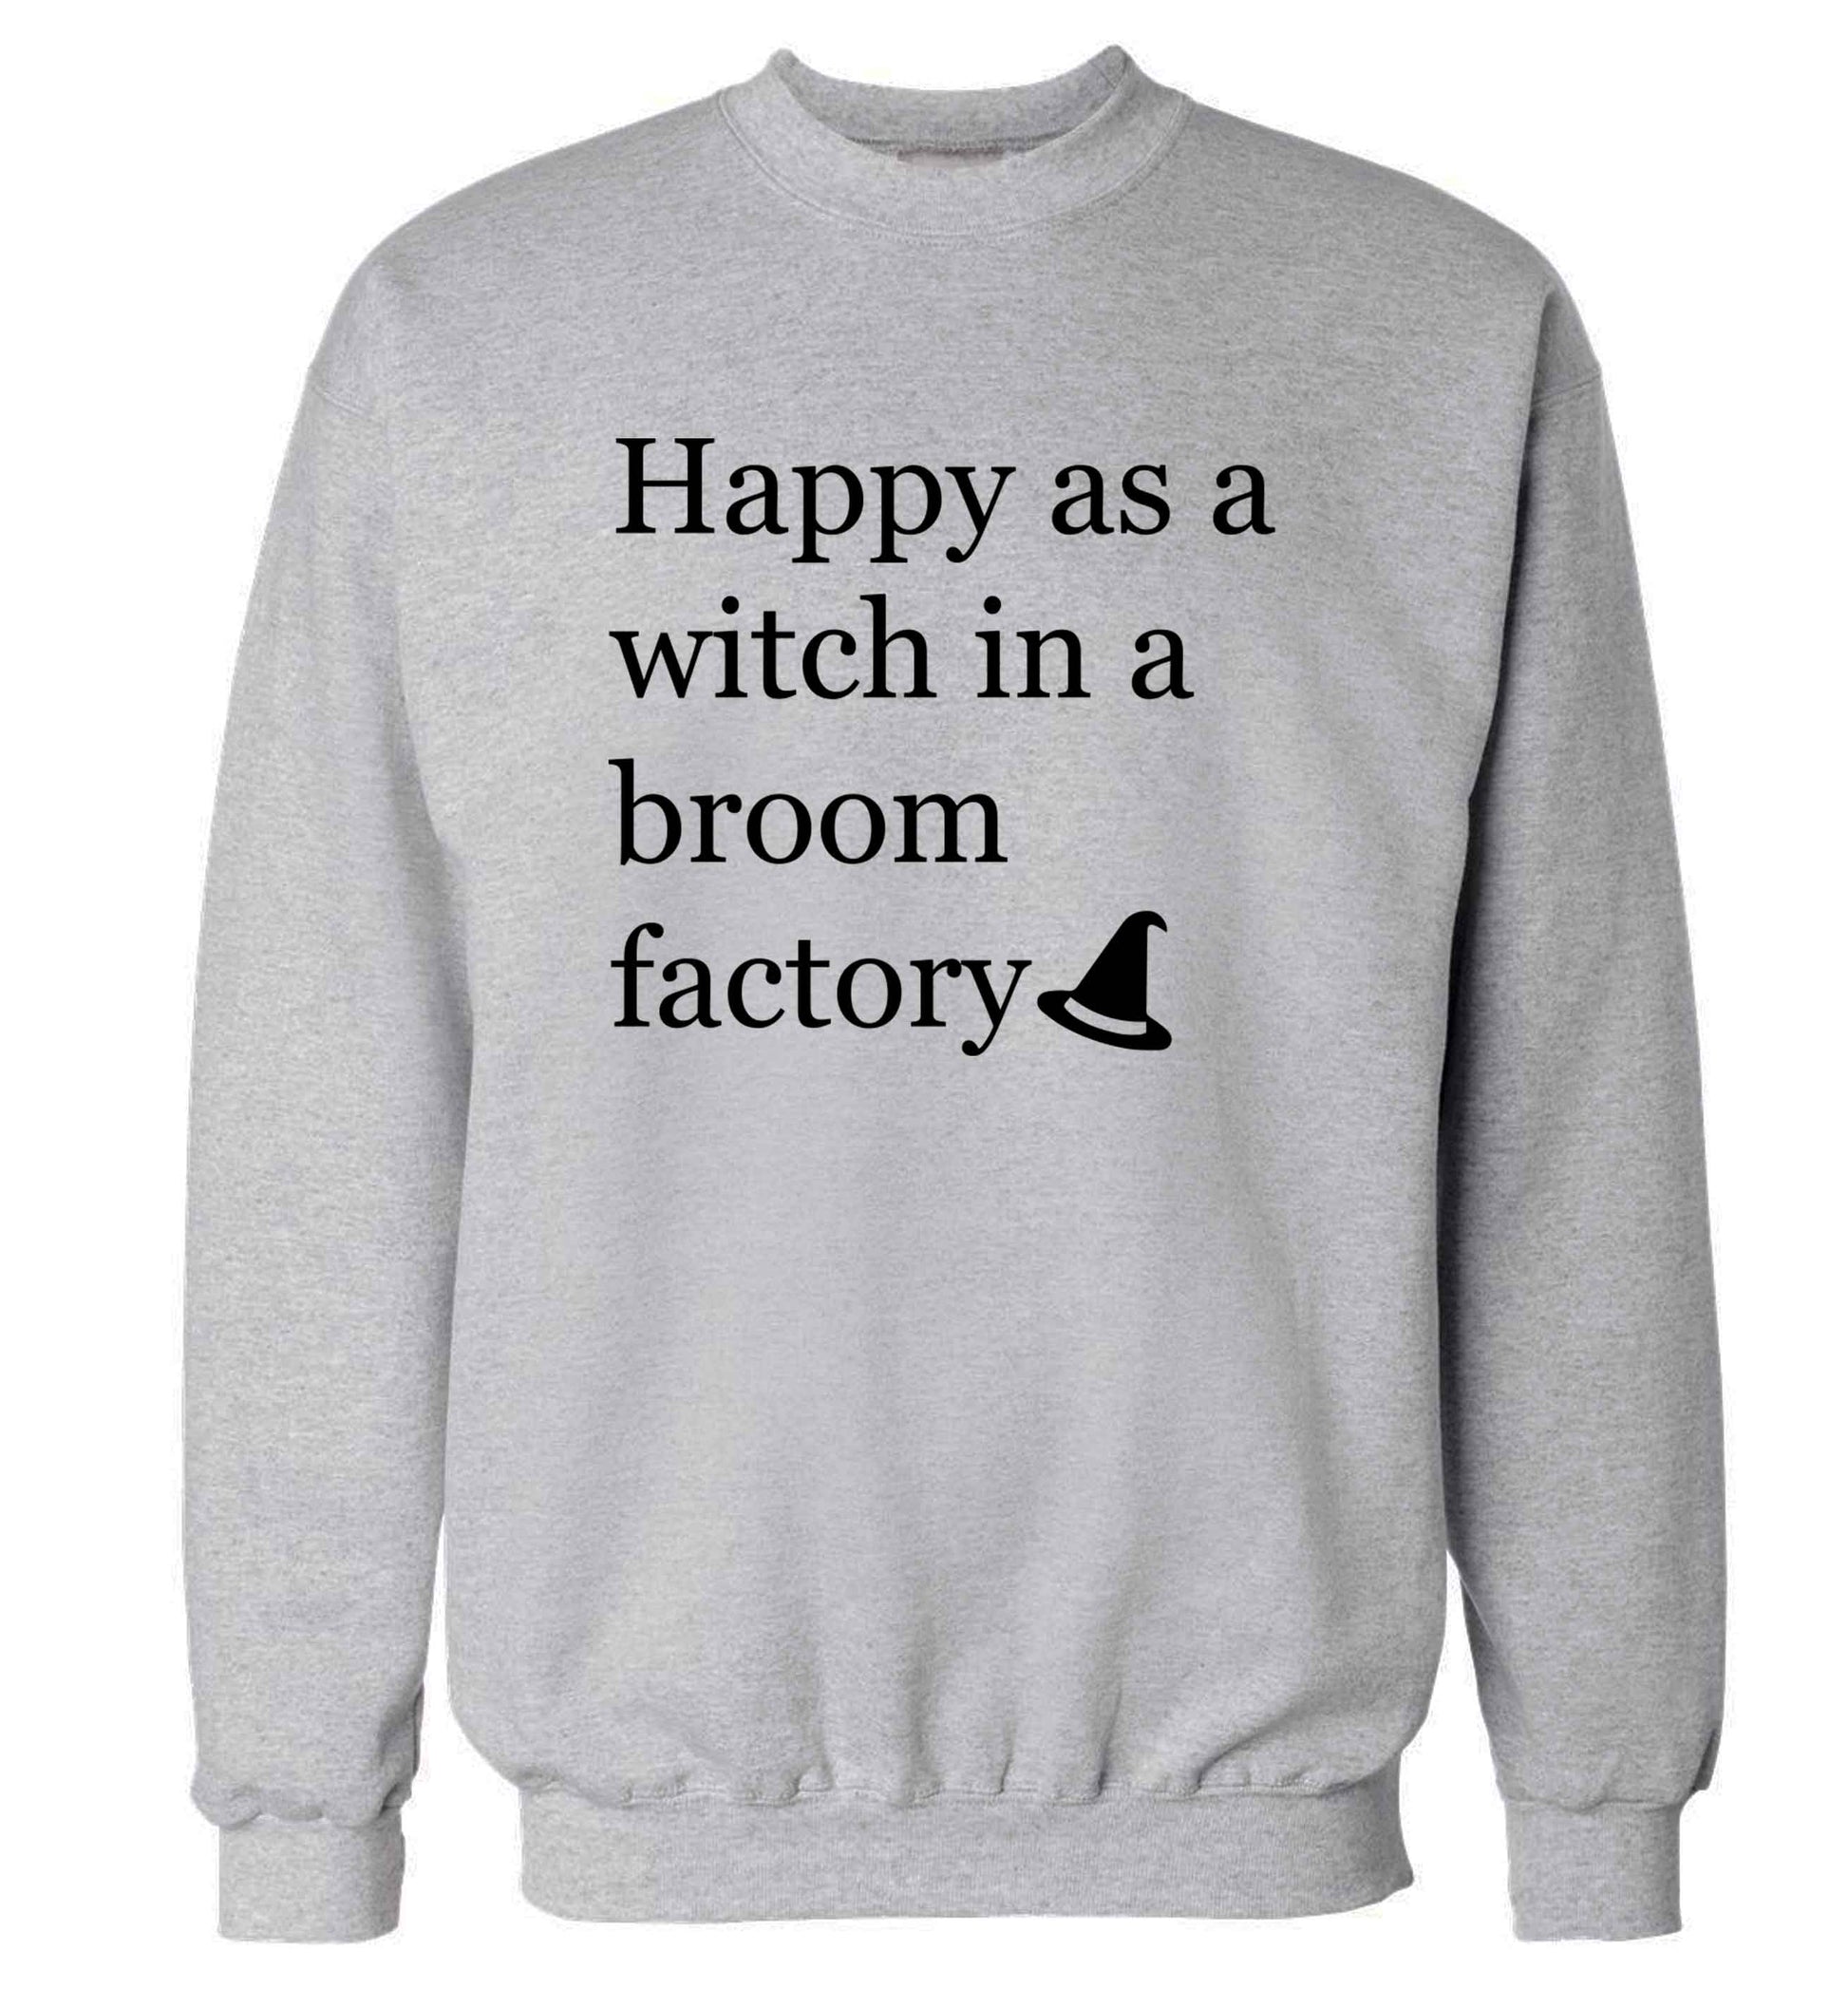 Happy as a witch in a broom factory adult's unisex grey sweater 2XL